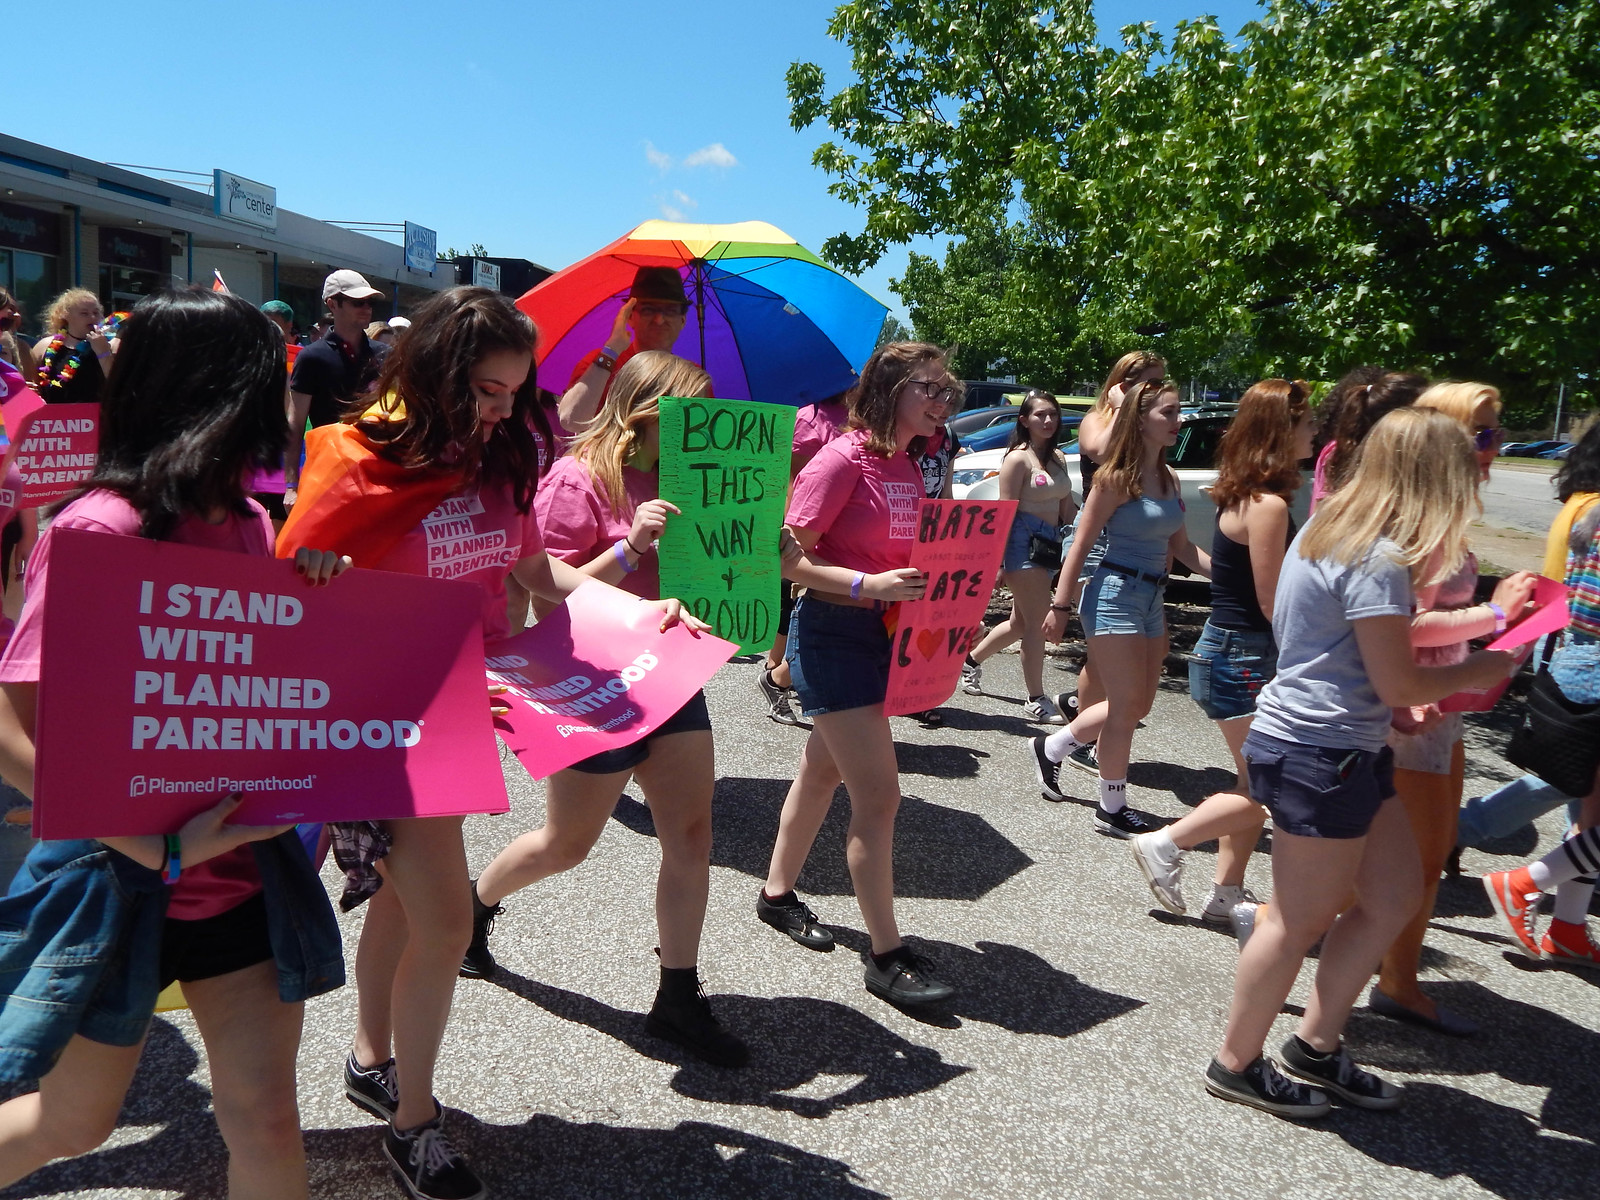 Planned Parenthood steps off in Pride Parade